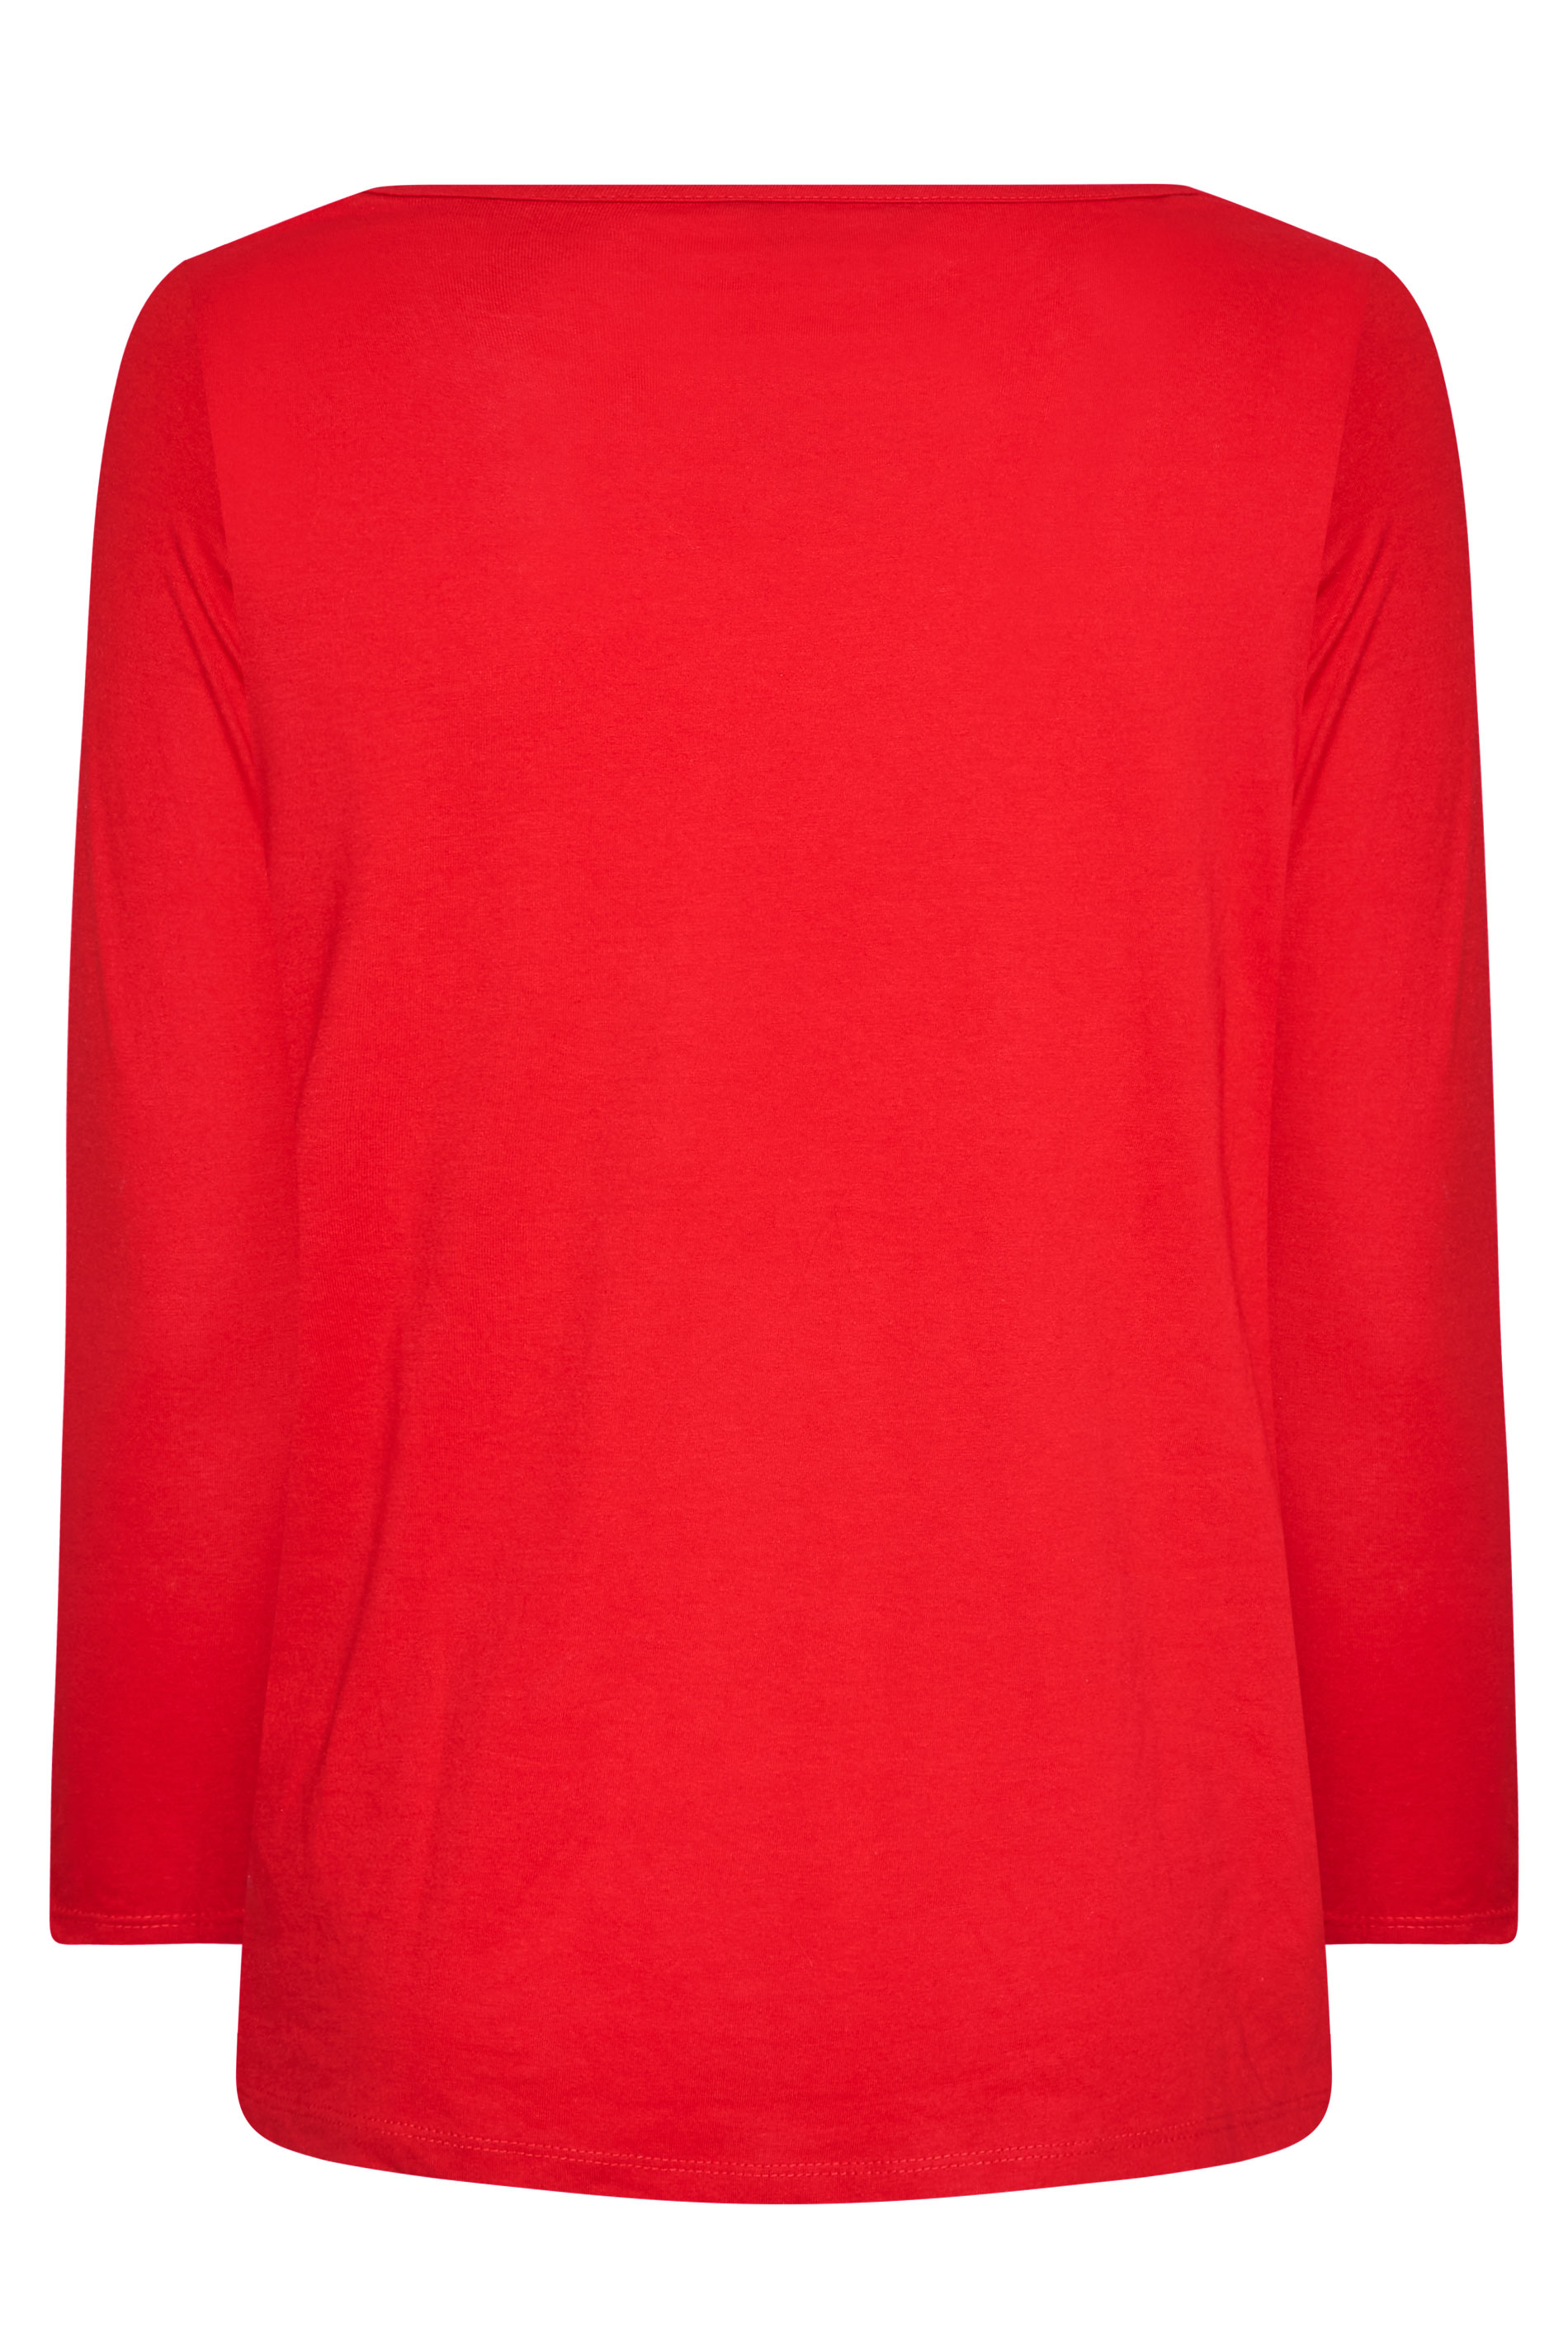 Grande taille  Tops Grande taille  T-Shirts | T-Shirt Rouge Manches Longues en Jersey - AI76561